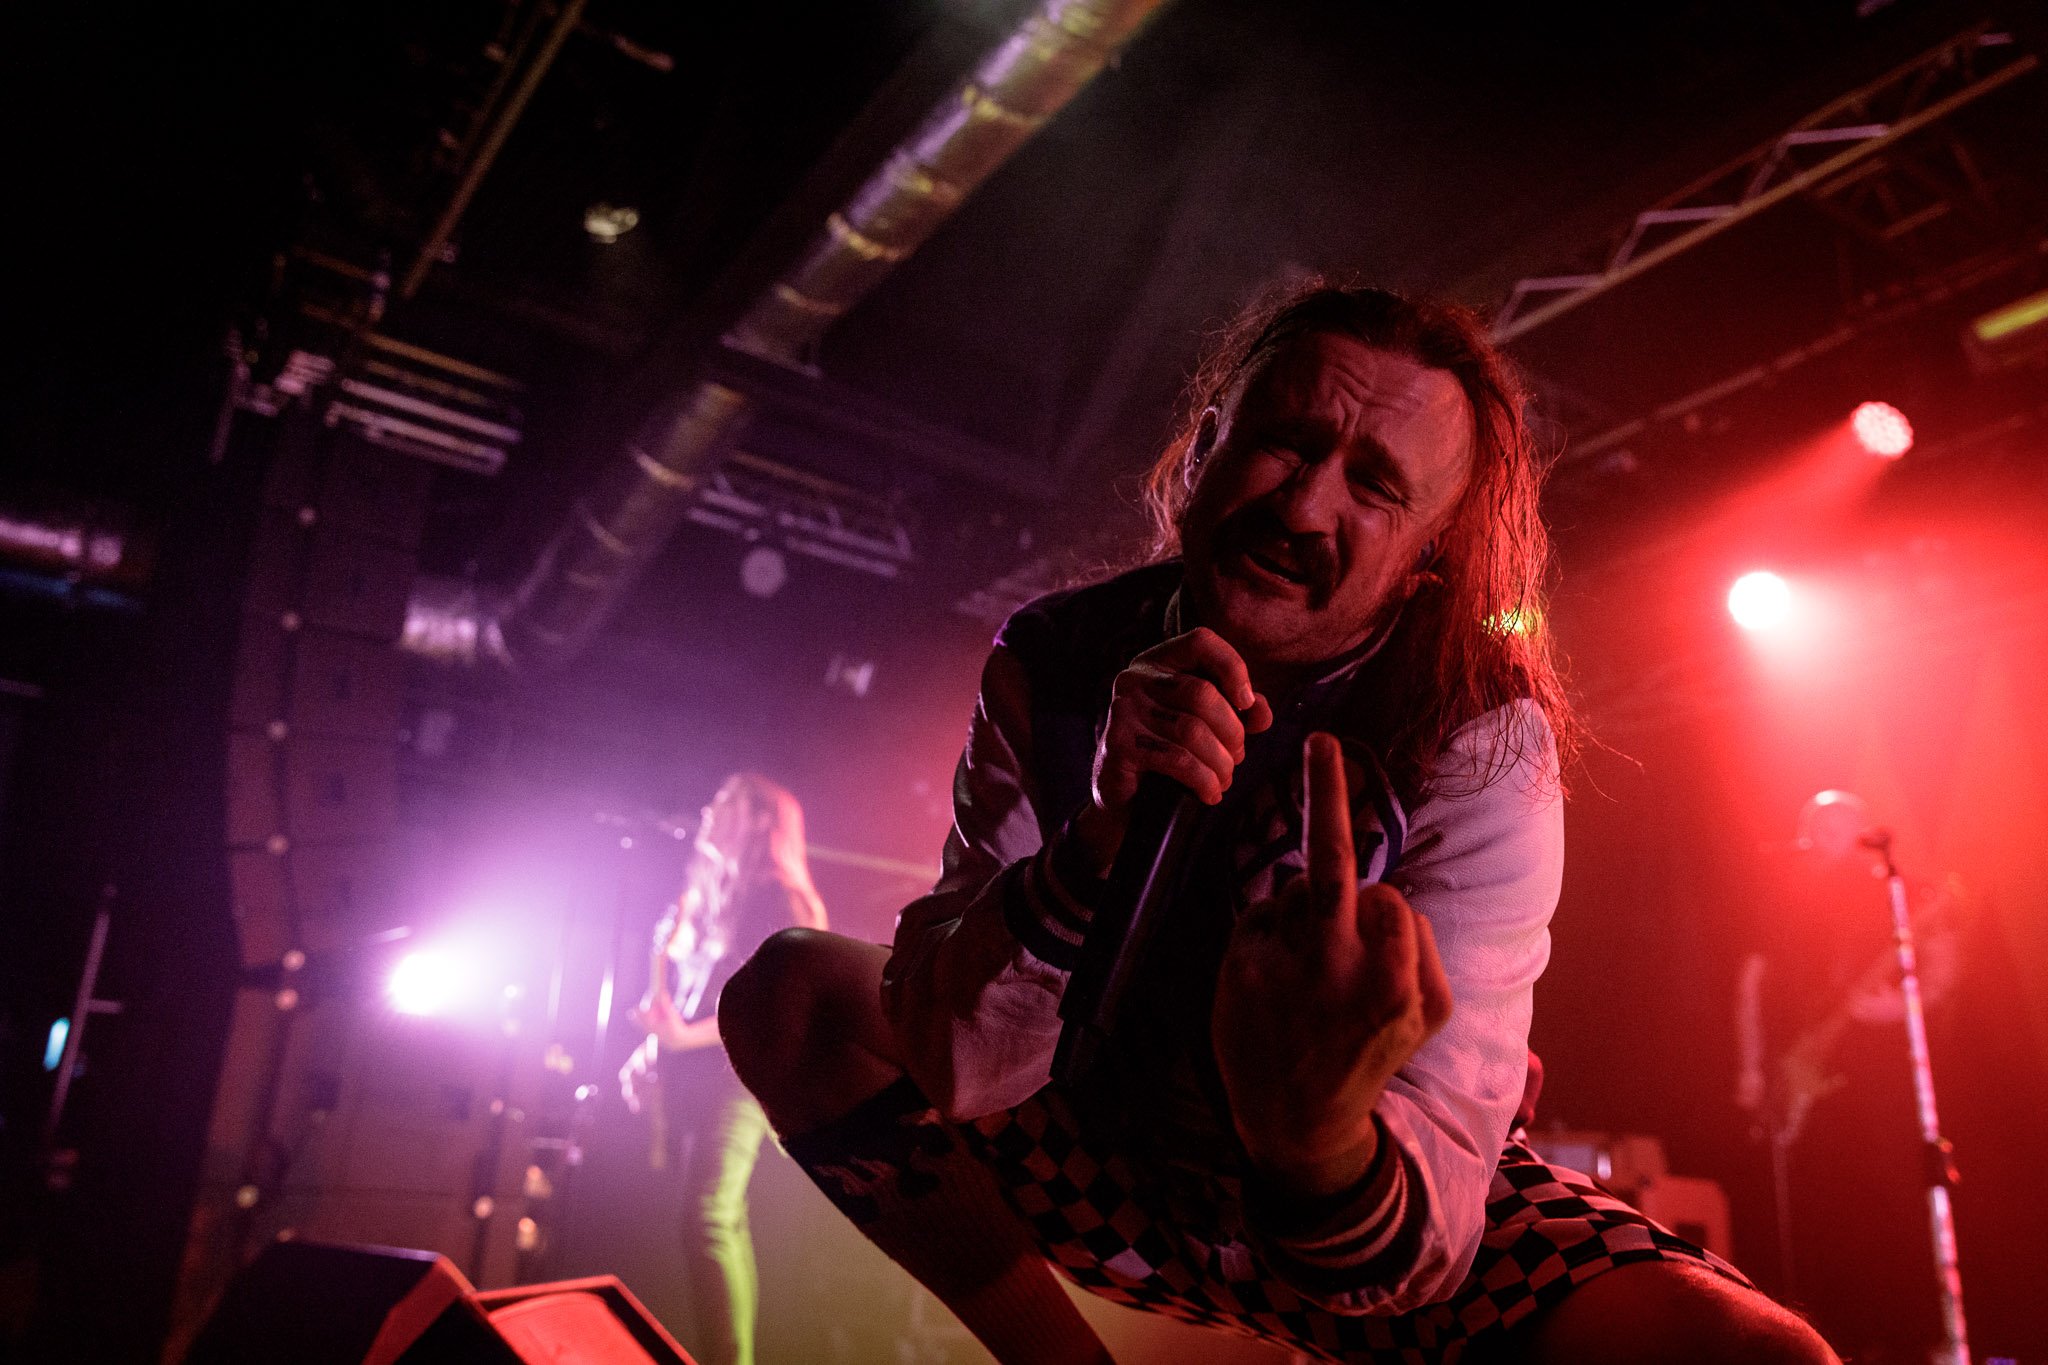 Massive Wagons at the O2 Academy in Liverpool on November 3rd 20